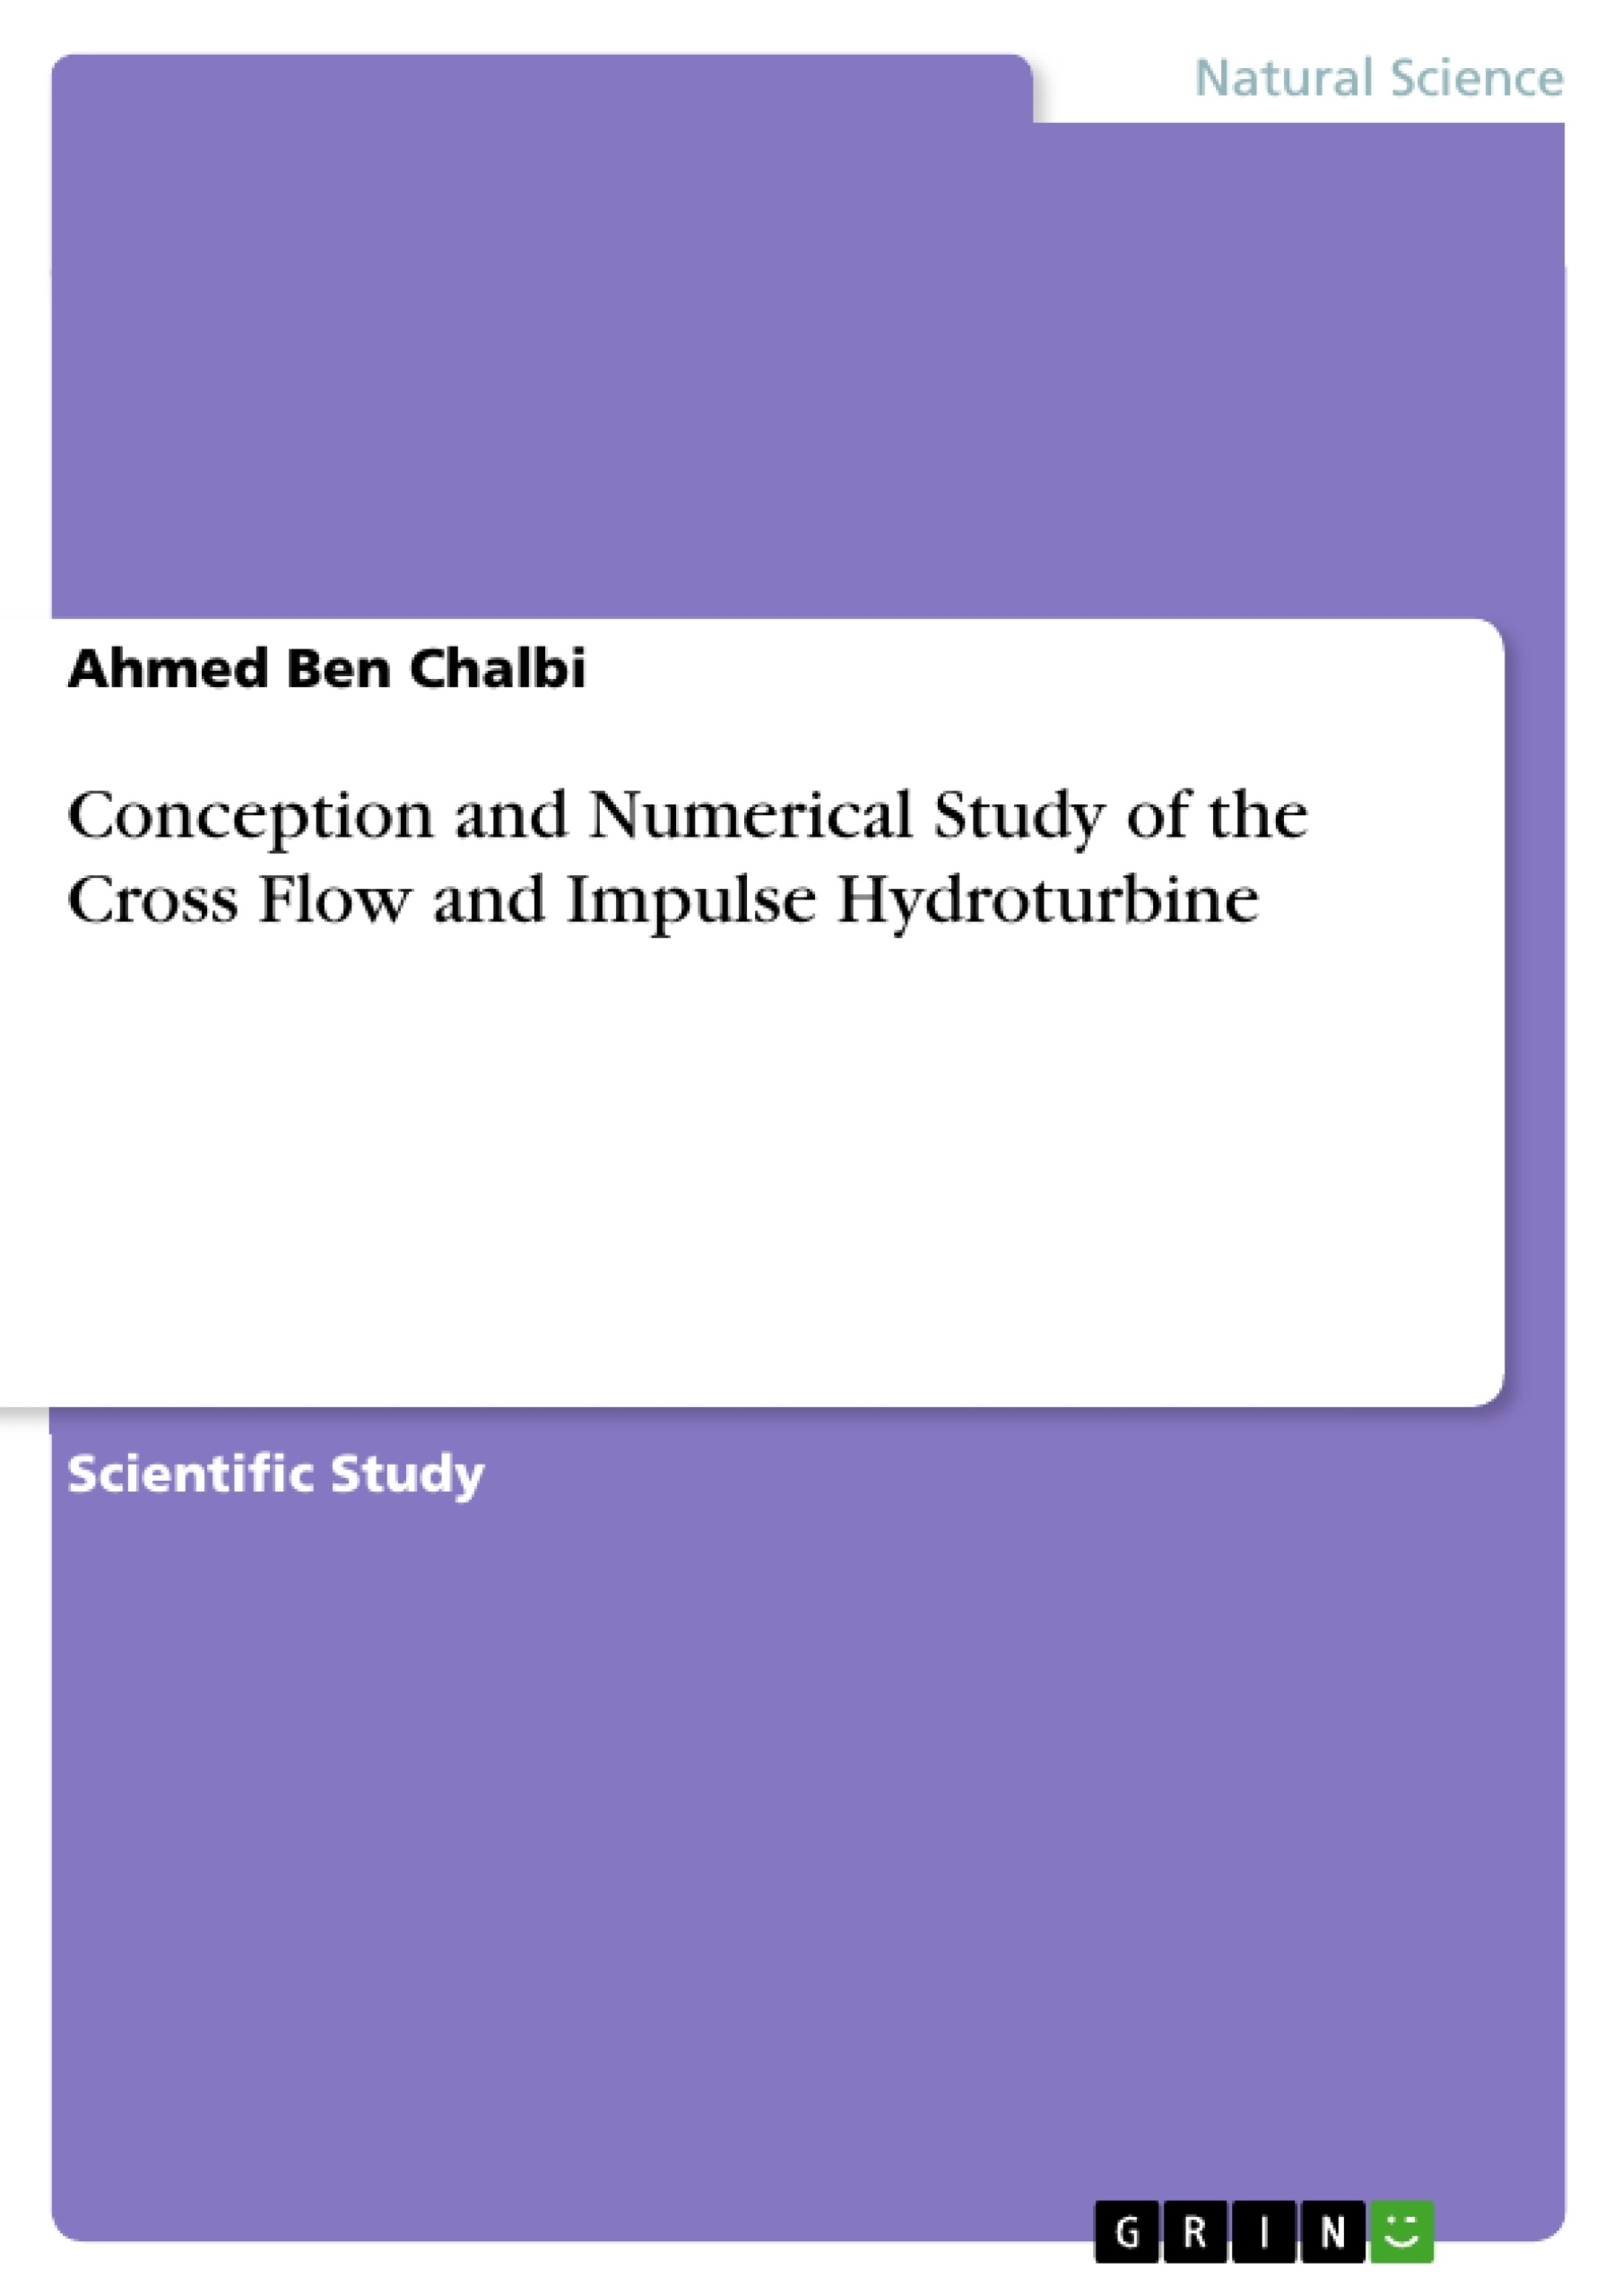 Título: Conception and Numerical Study of the Cross Flow and Impulse Hydroturbine